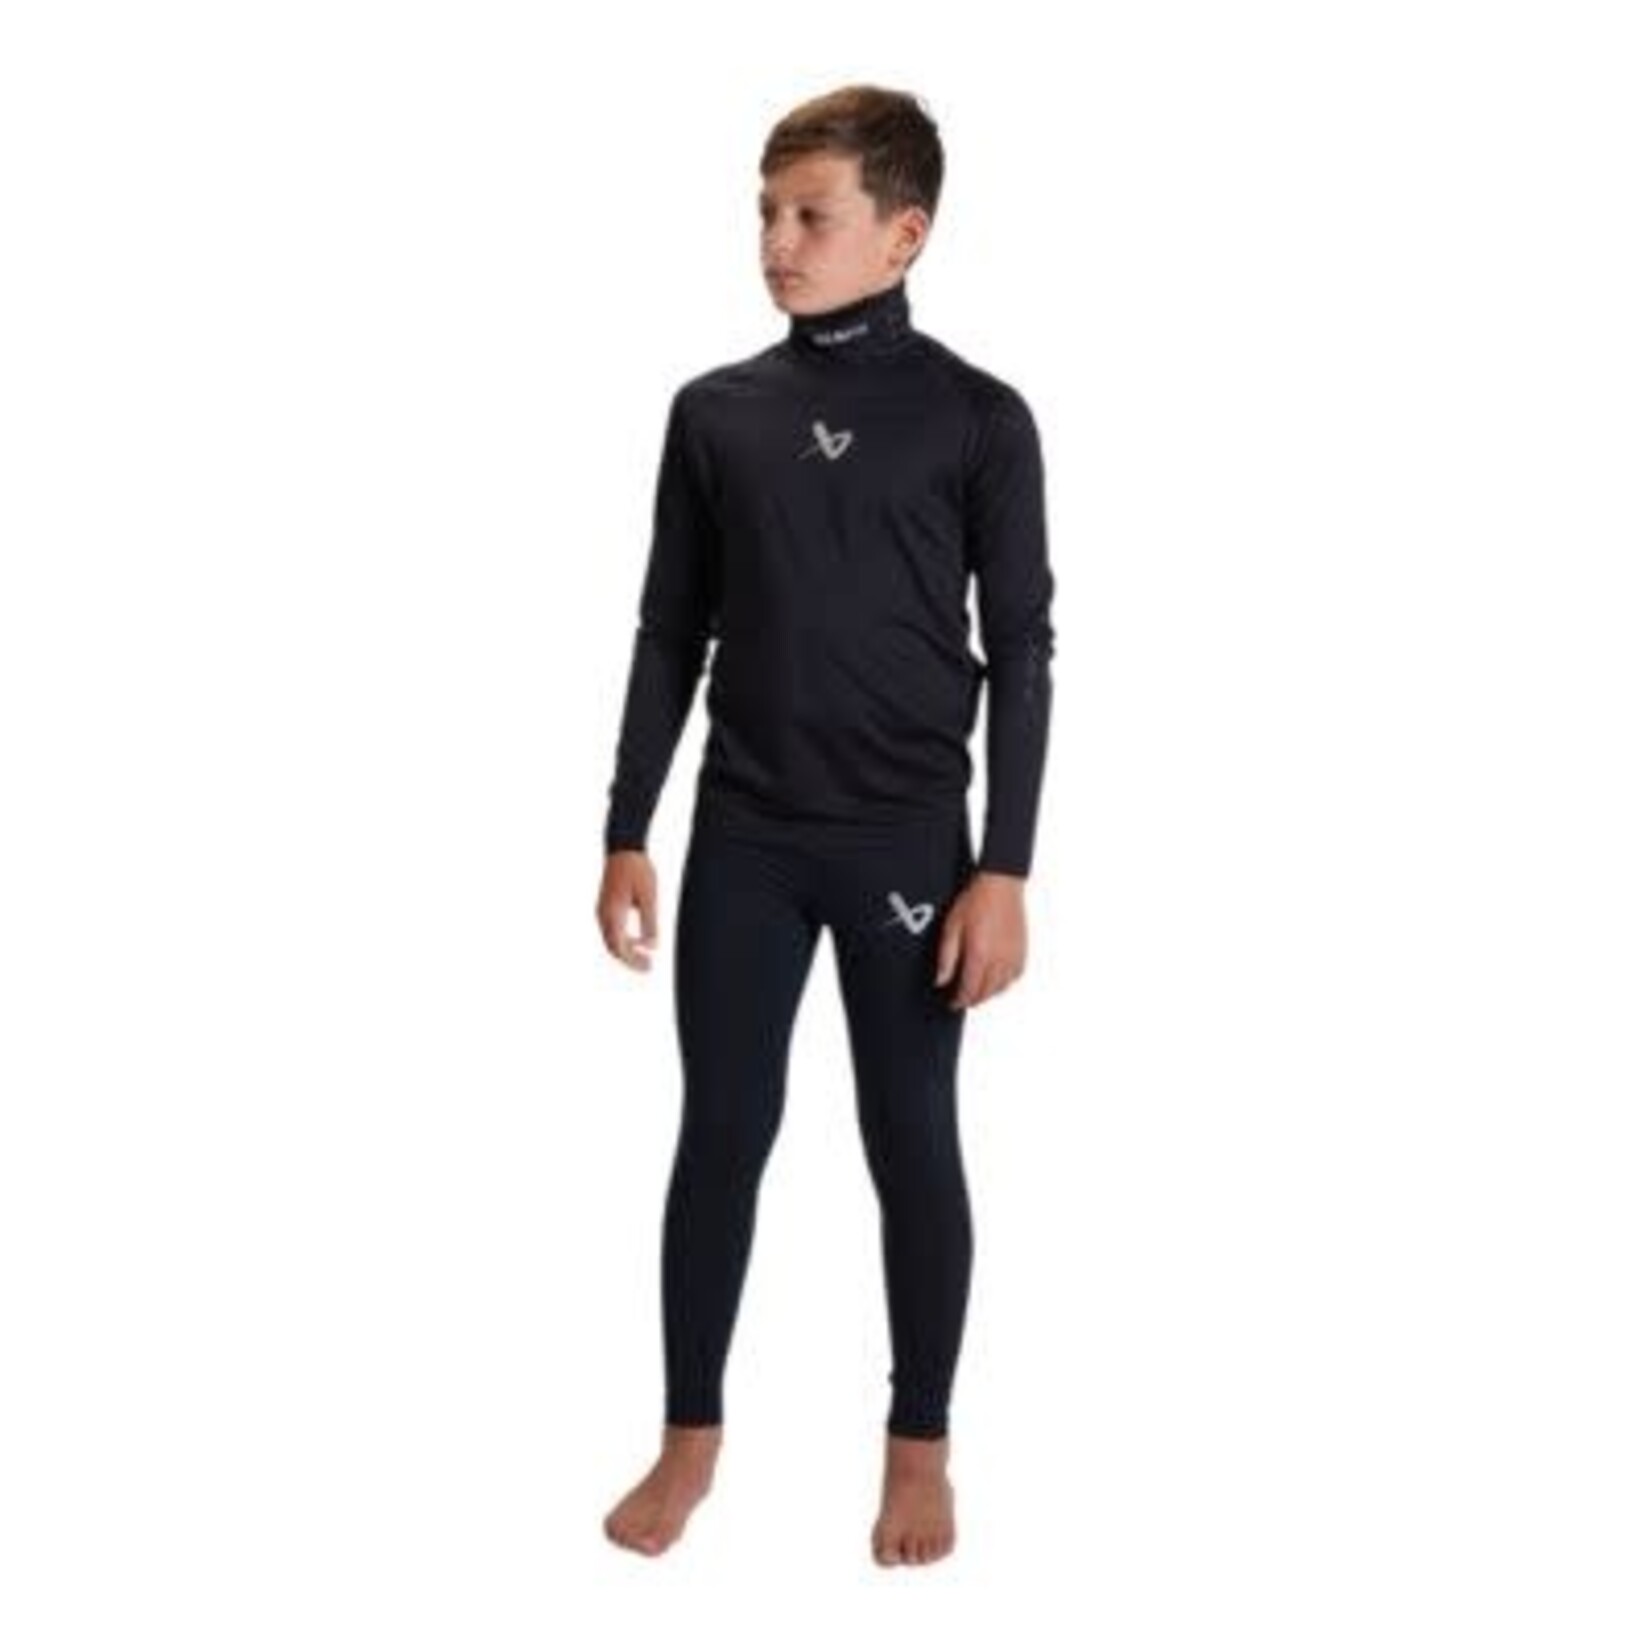 Bauer Bauer Long Sleeve Integrated NeckProtect Top, Youth